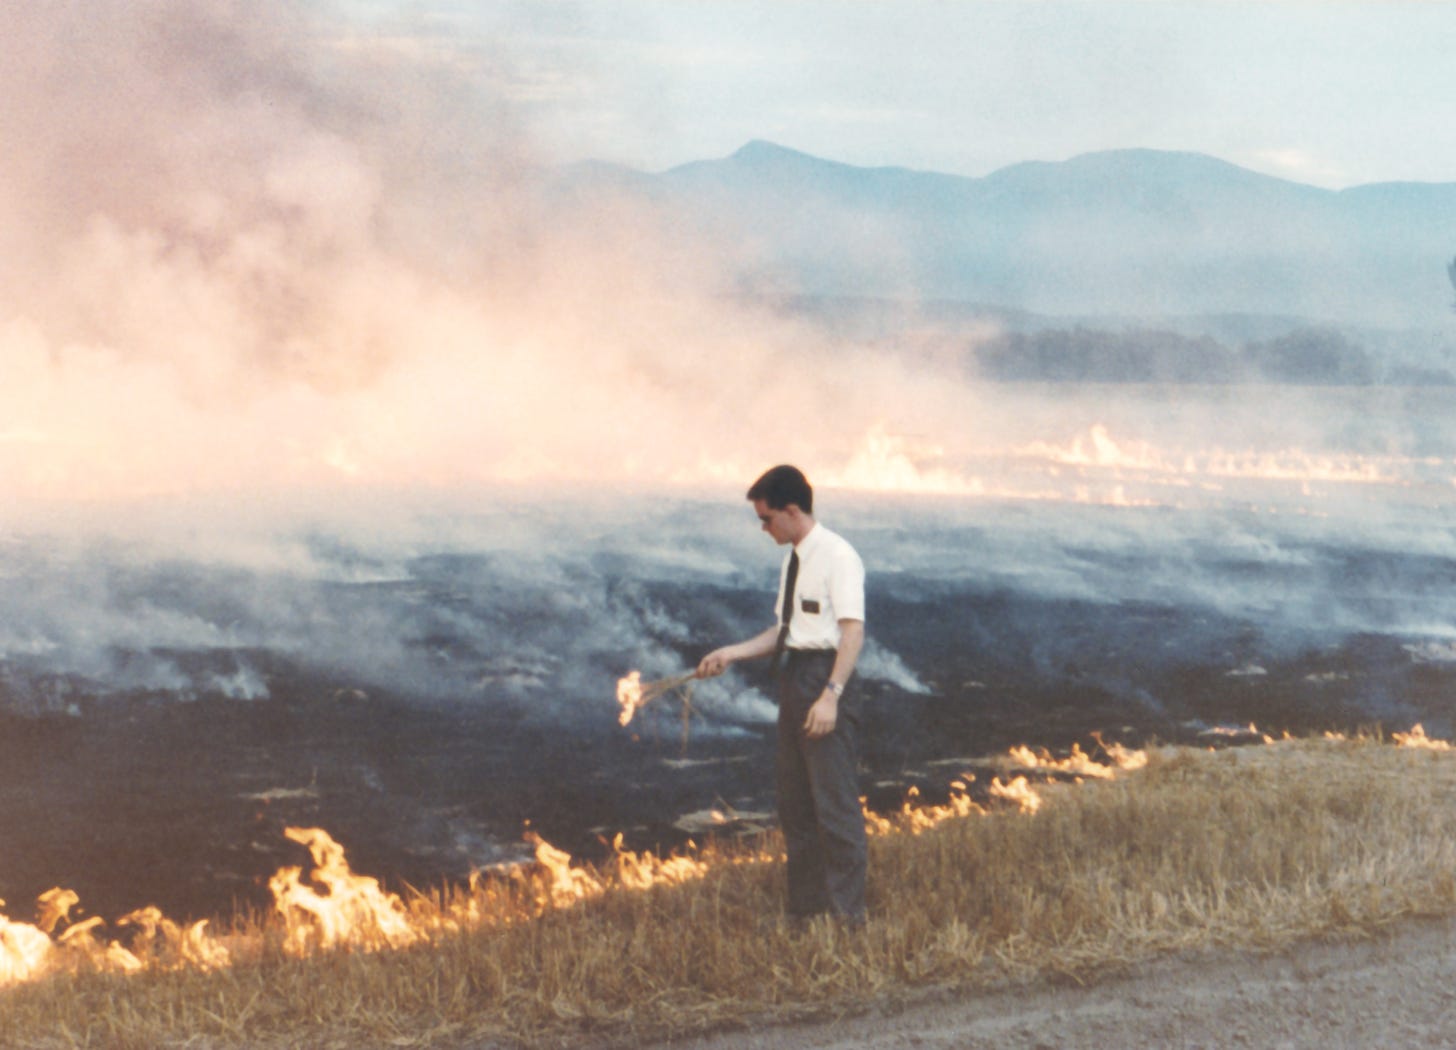 A Mormon missionary wearing dress clothes and a black name tag, stands before a field of burning, smoking wheat stubble holding a sheaf of flaming wheat.